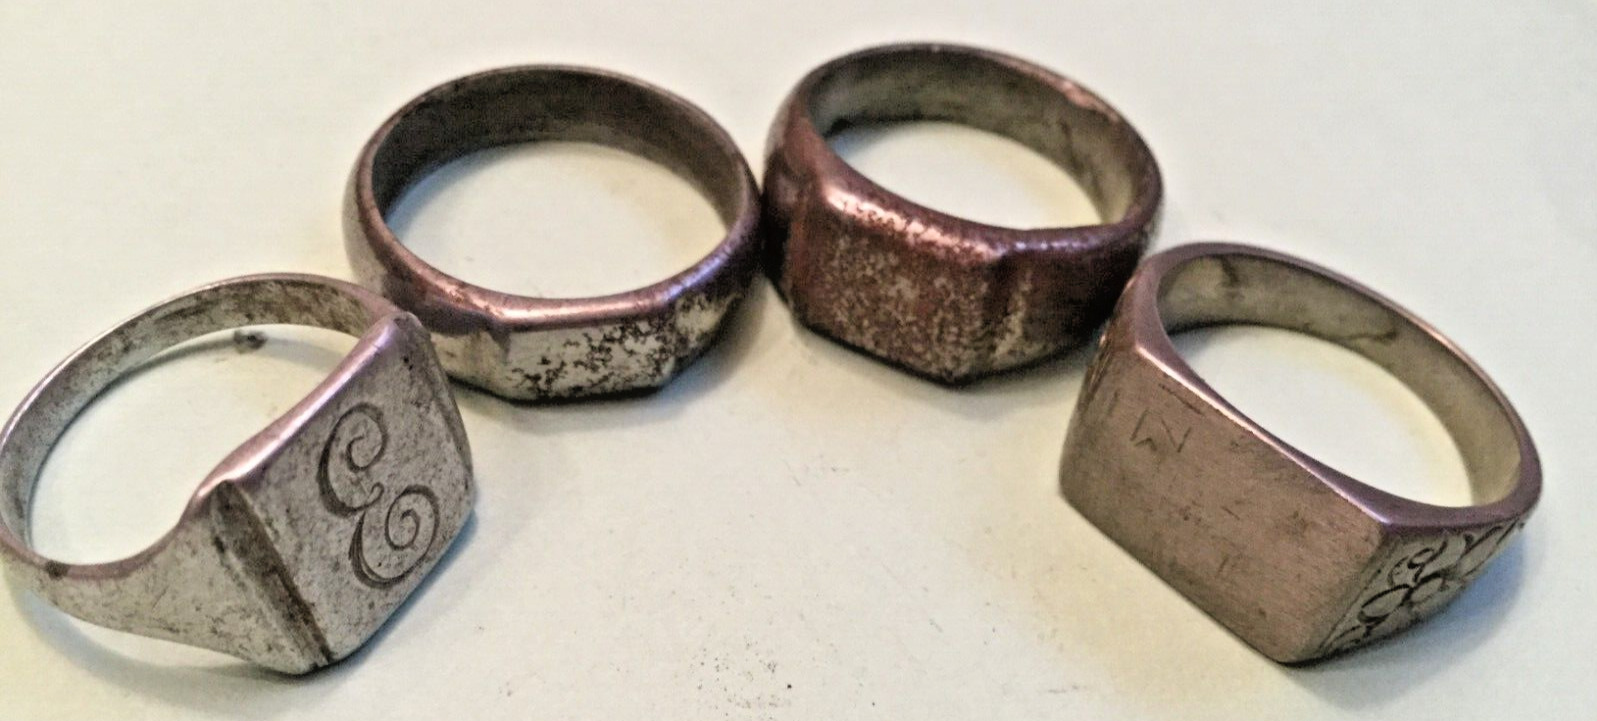 4 Vintage WW11 Era Trench Art Rings Monogrammed Scrolled E & Flowers